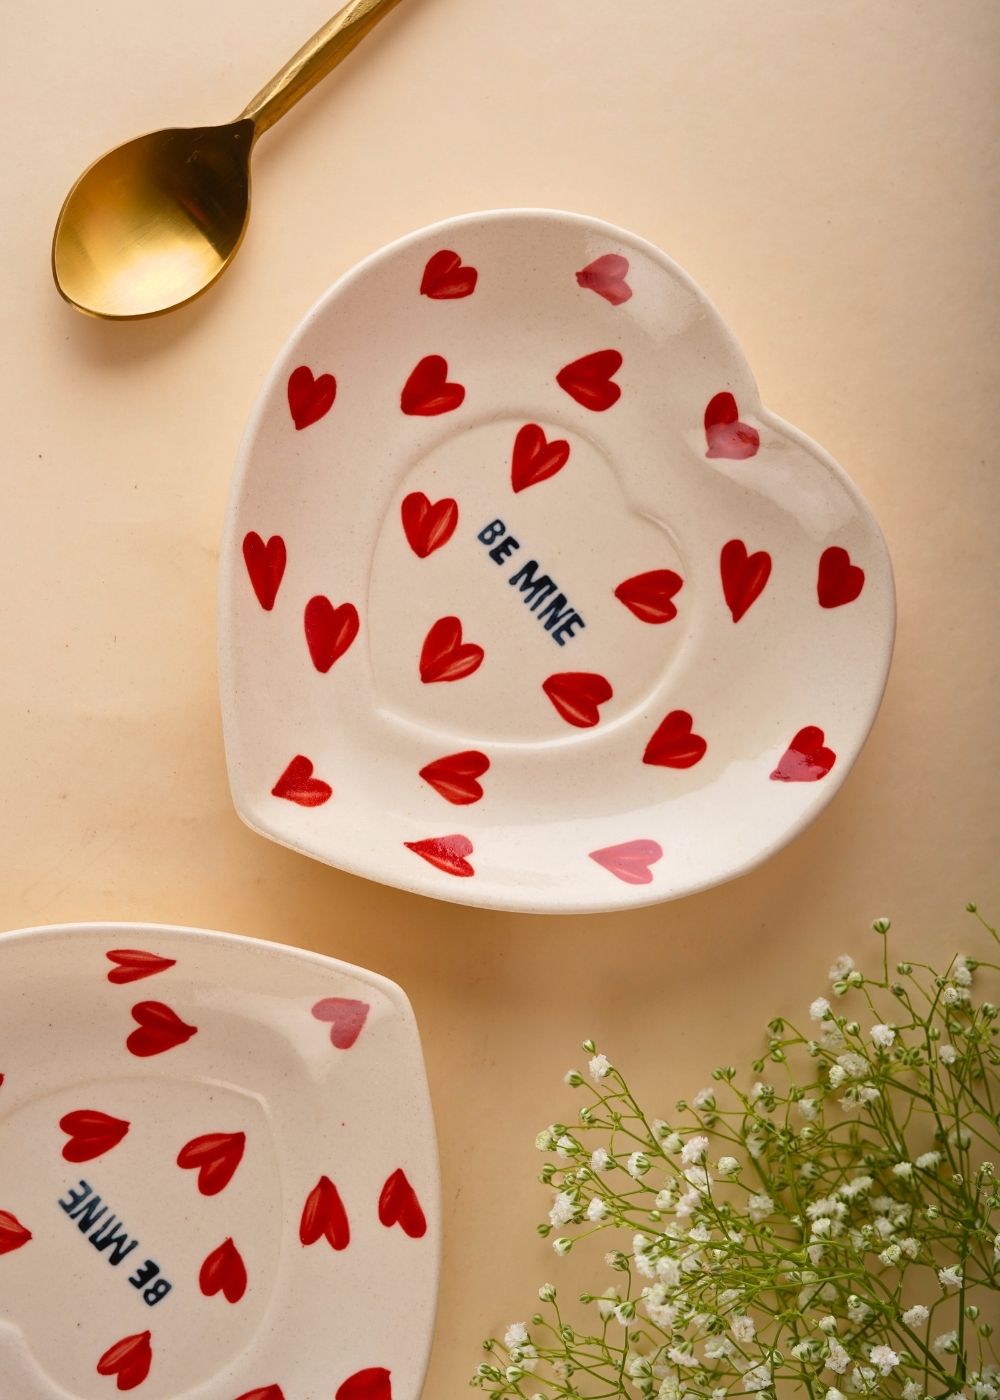 be mine heart platter with some red little hearts